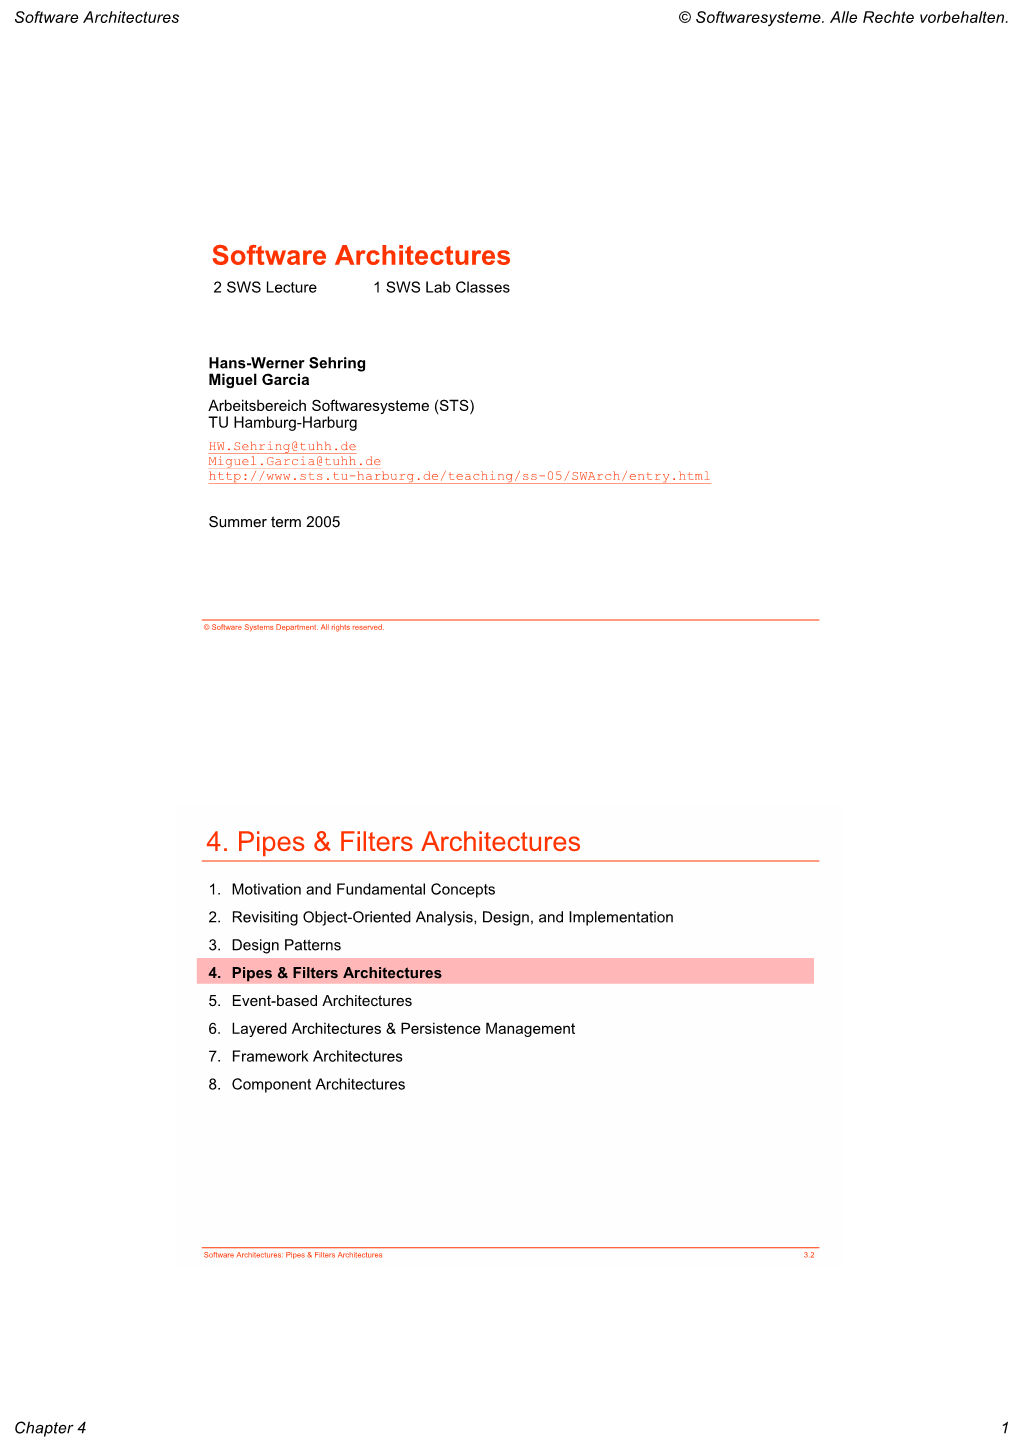 Software Architectures 4. Pipes & Filters Architectures